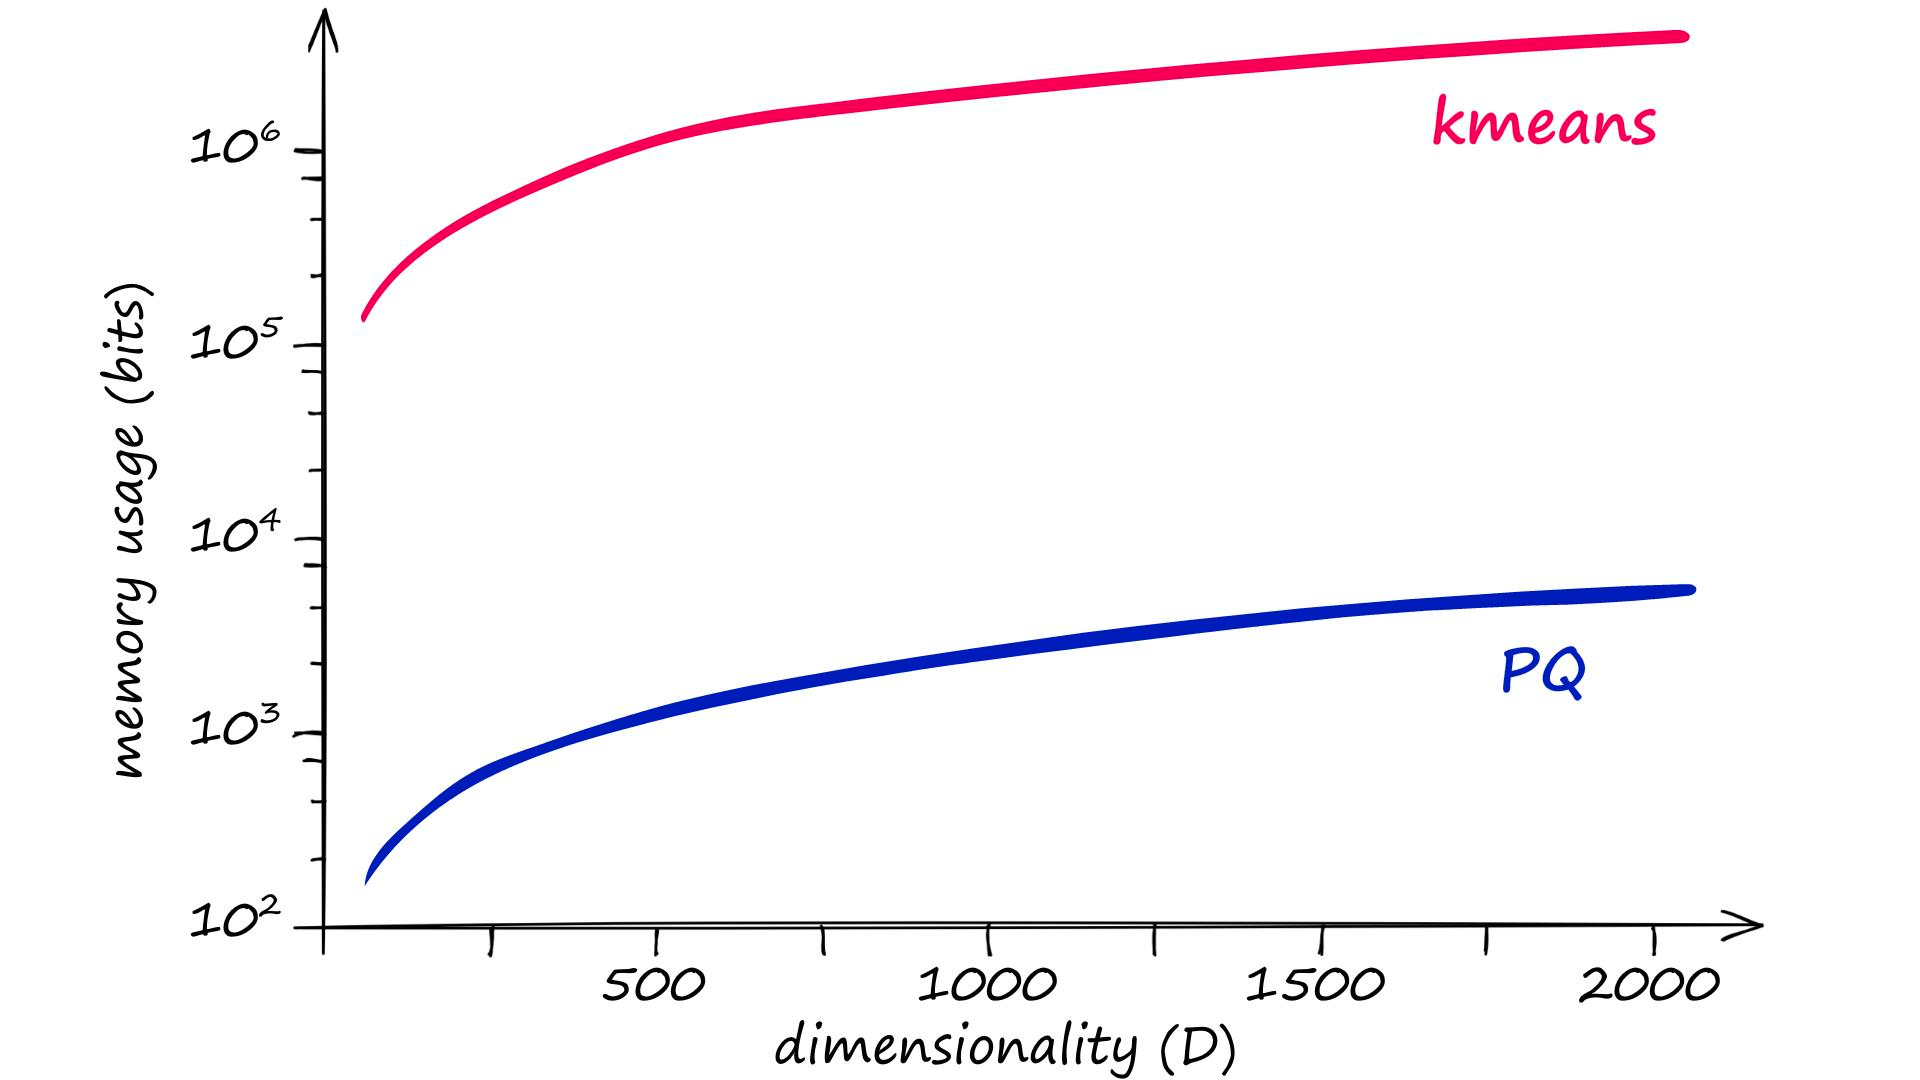 Memory usage (and complexity) vs dimensionality using k=2048 and m=8.